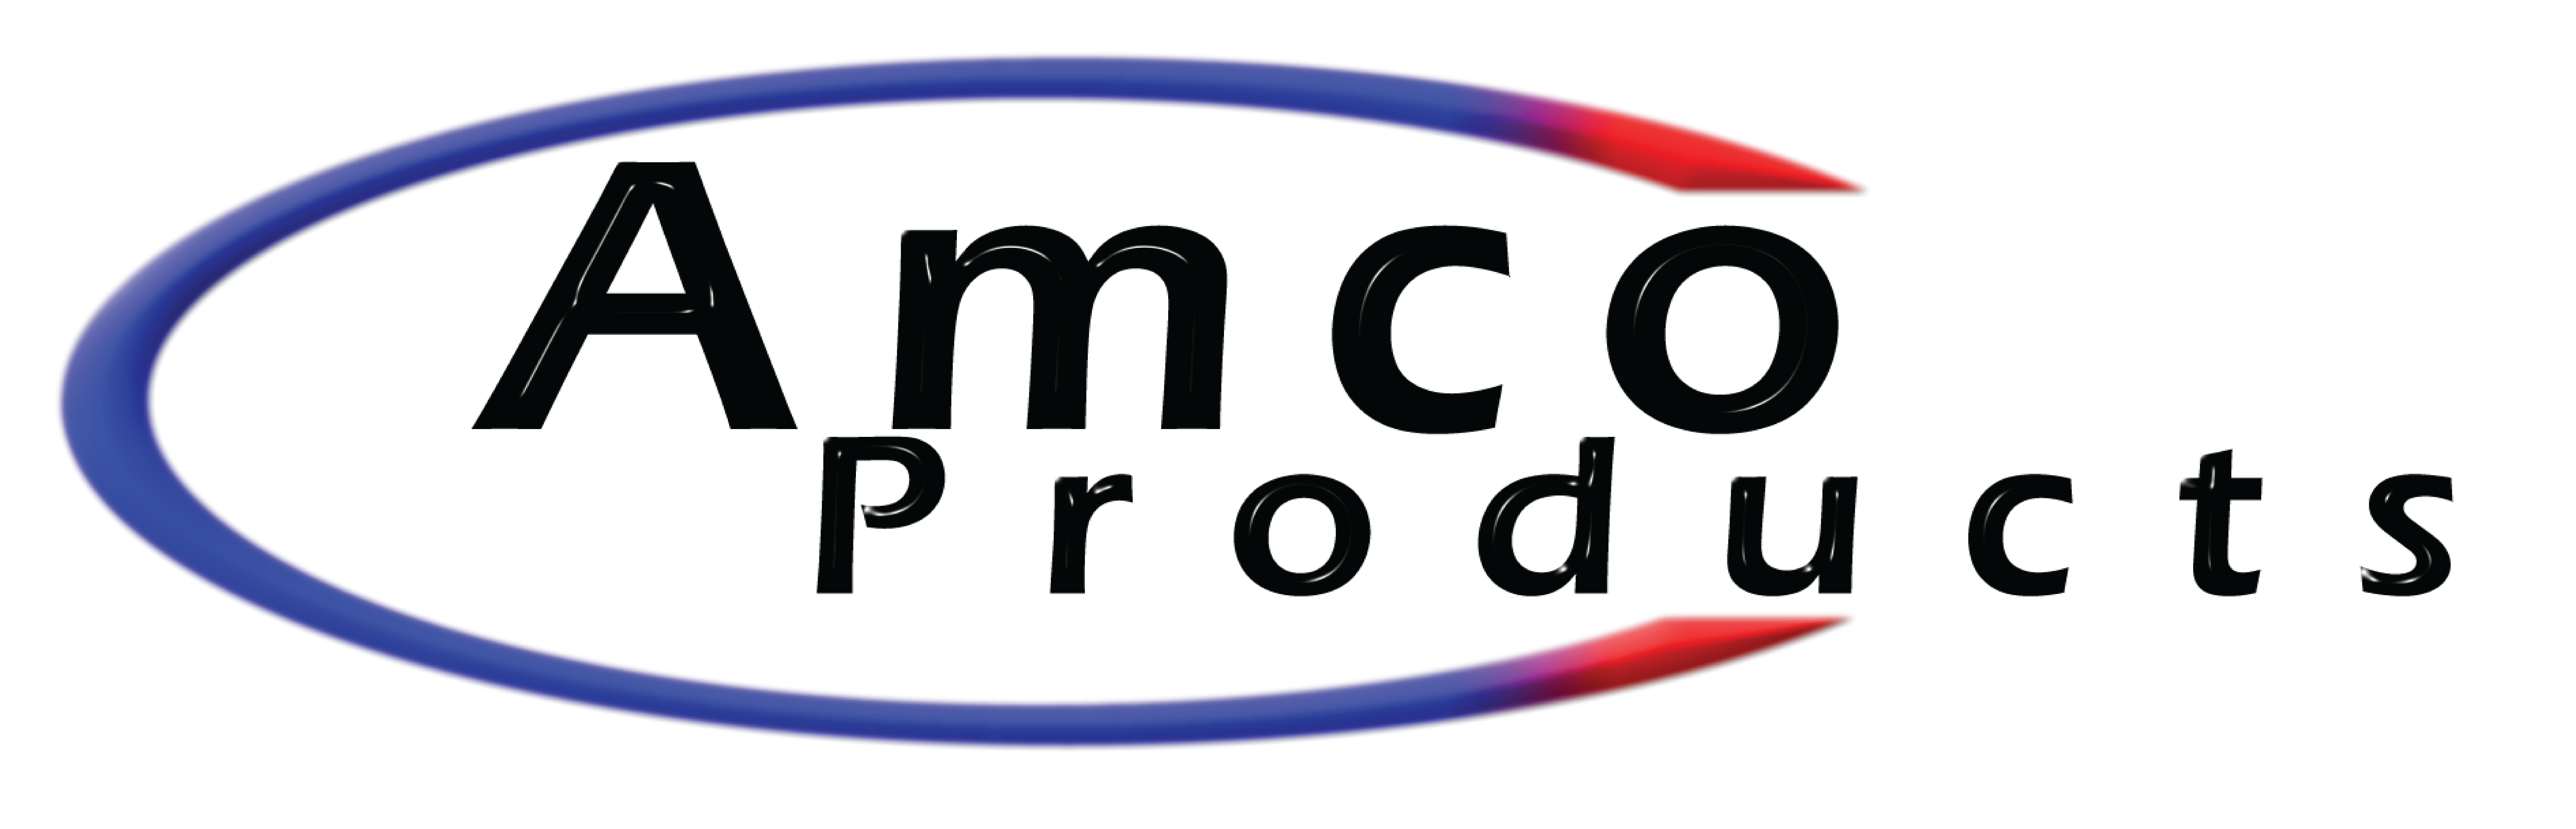 Amco Products